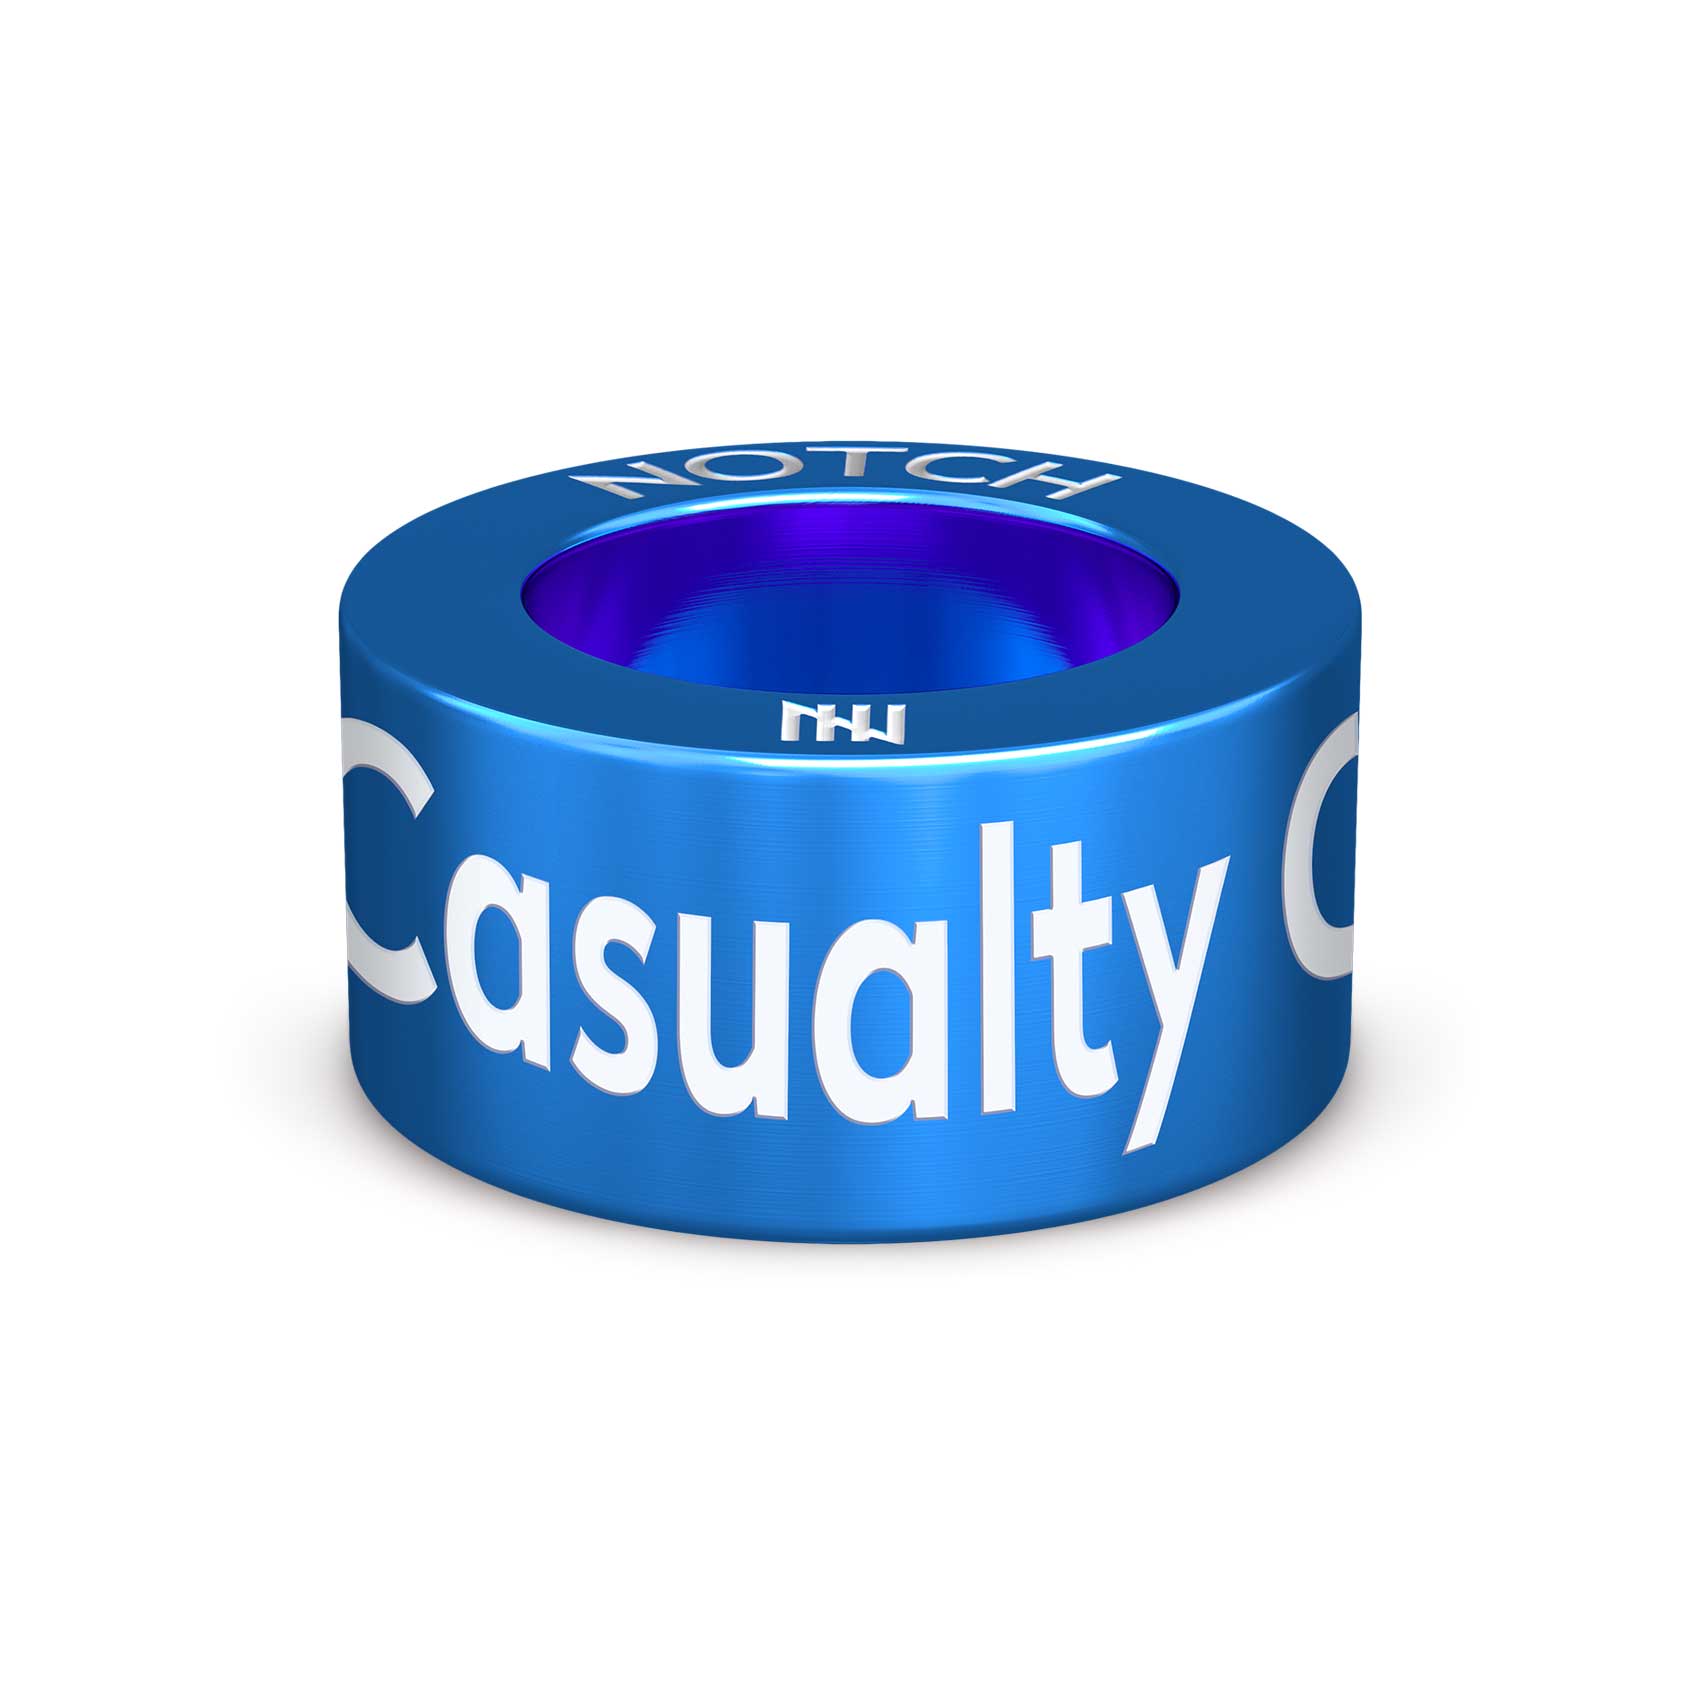 Casualty Care Notch Charm